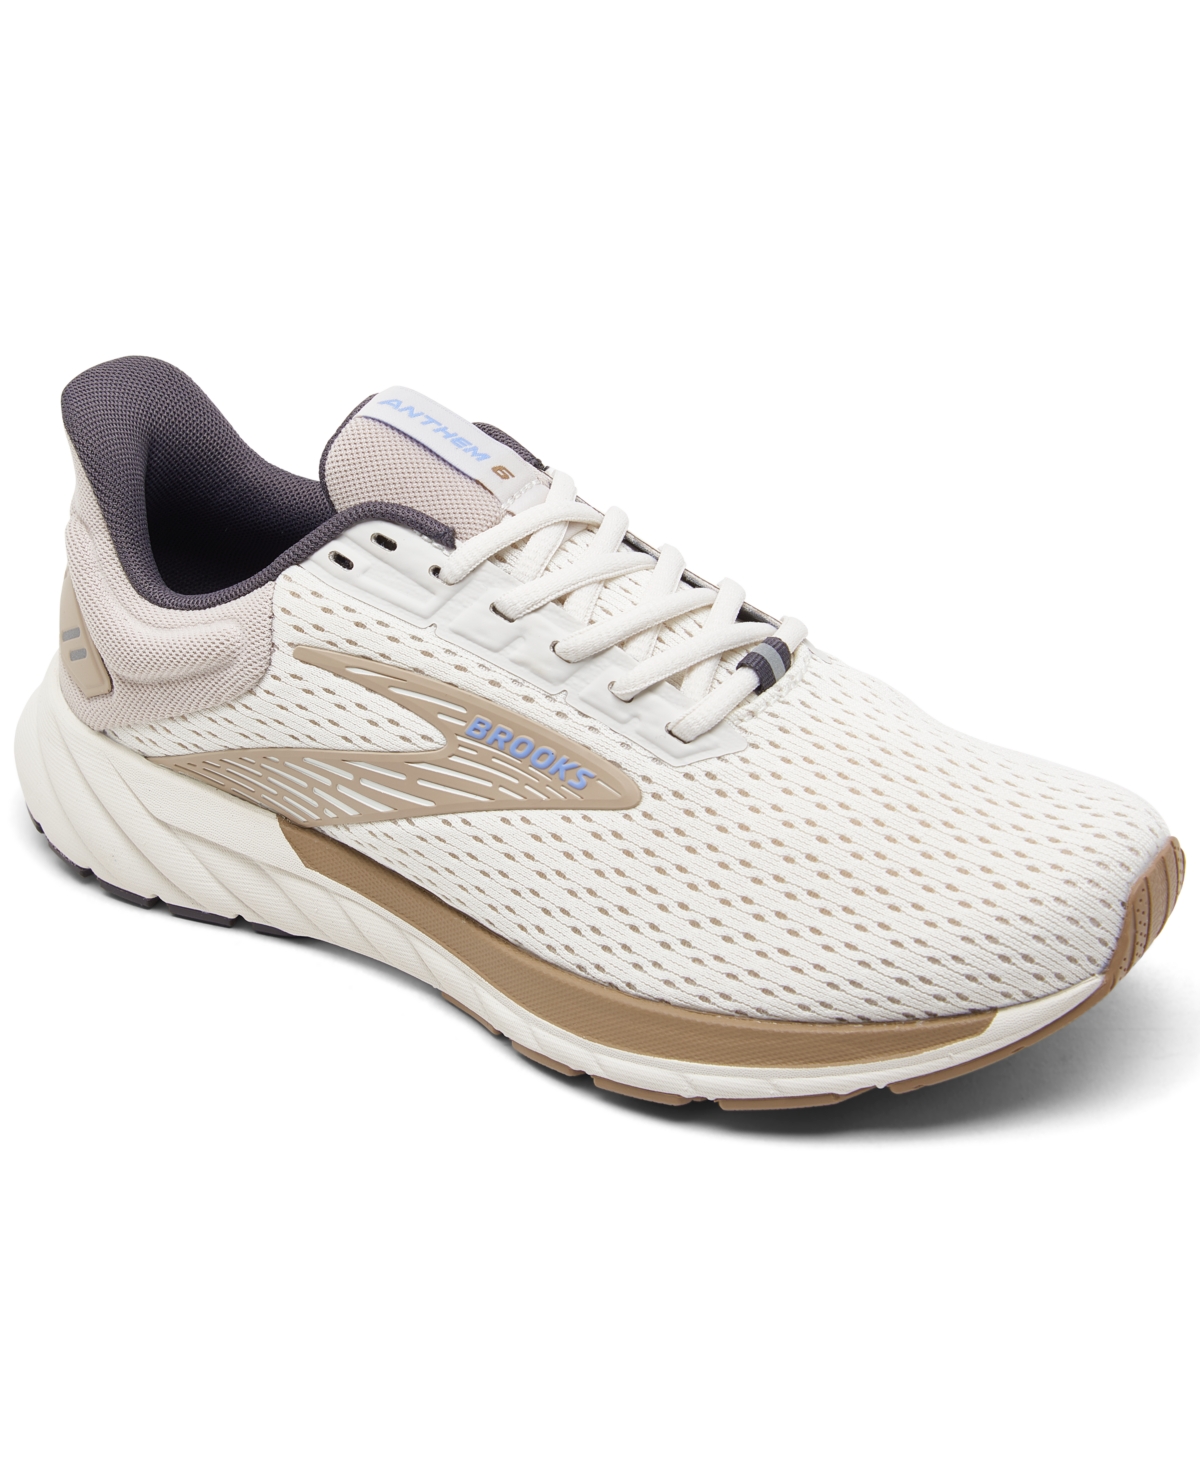 Women's Anthem 6 Running Sneakers from Finish Line - Coconut, Portabella, Iris